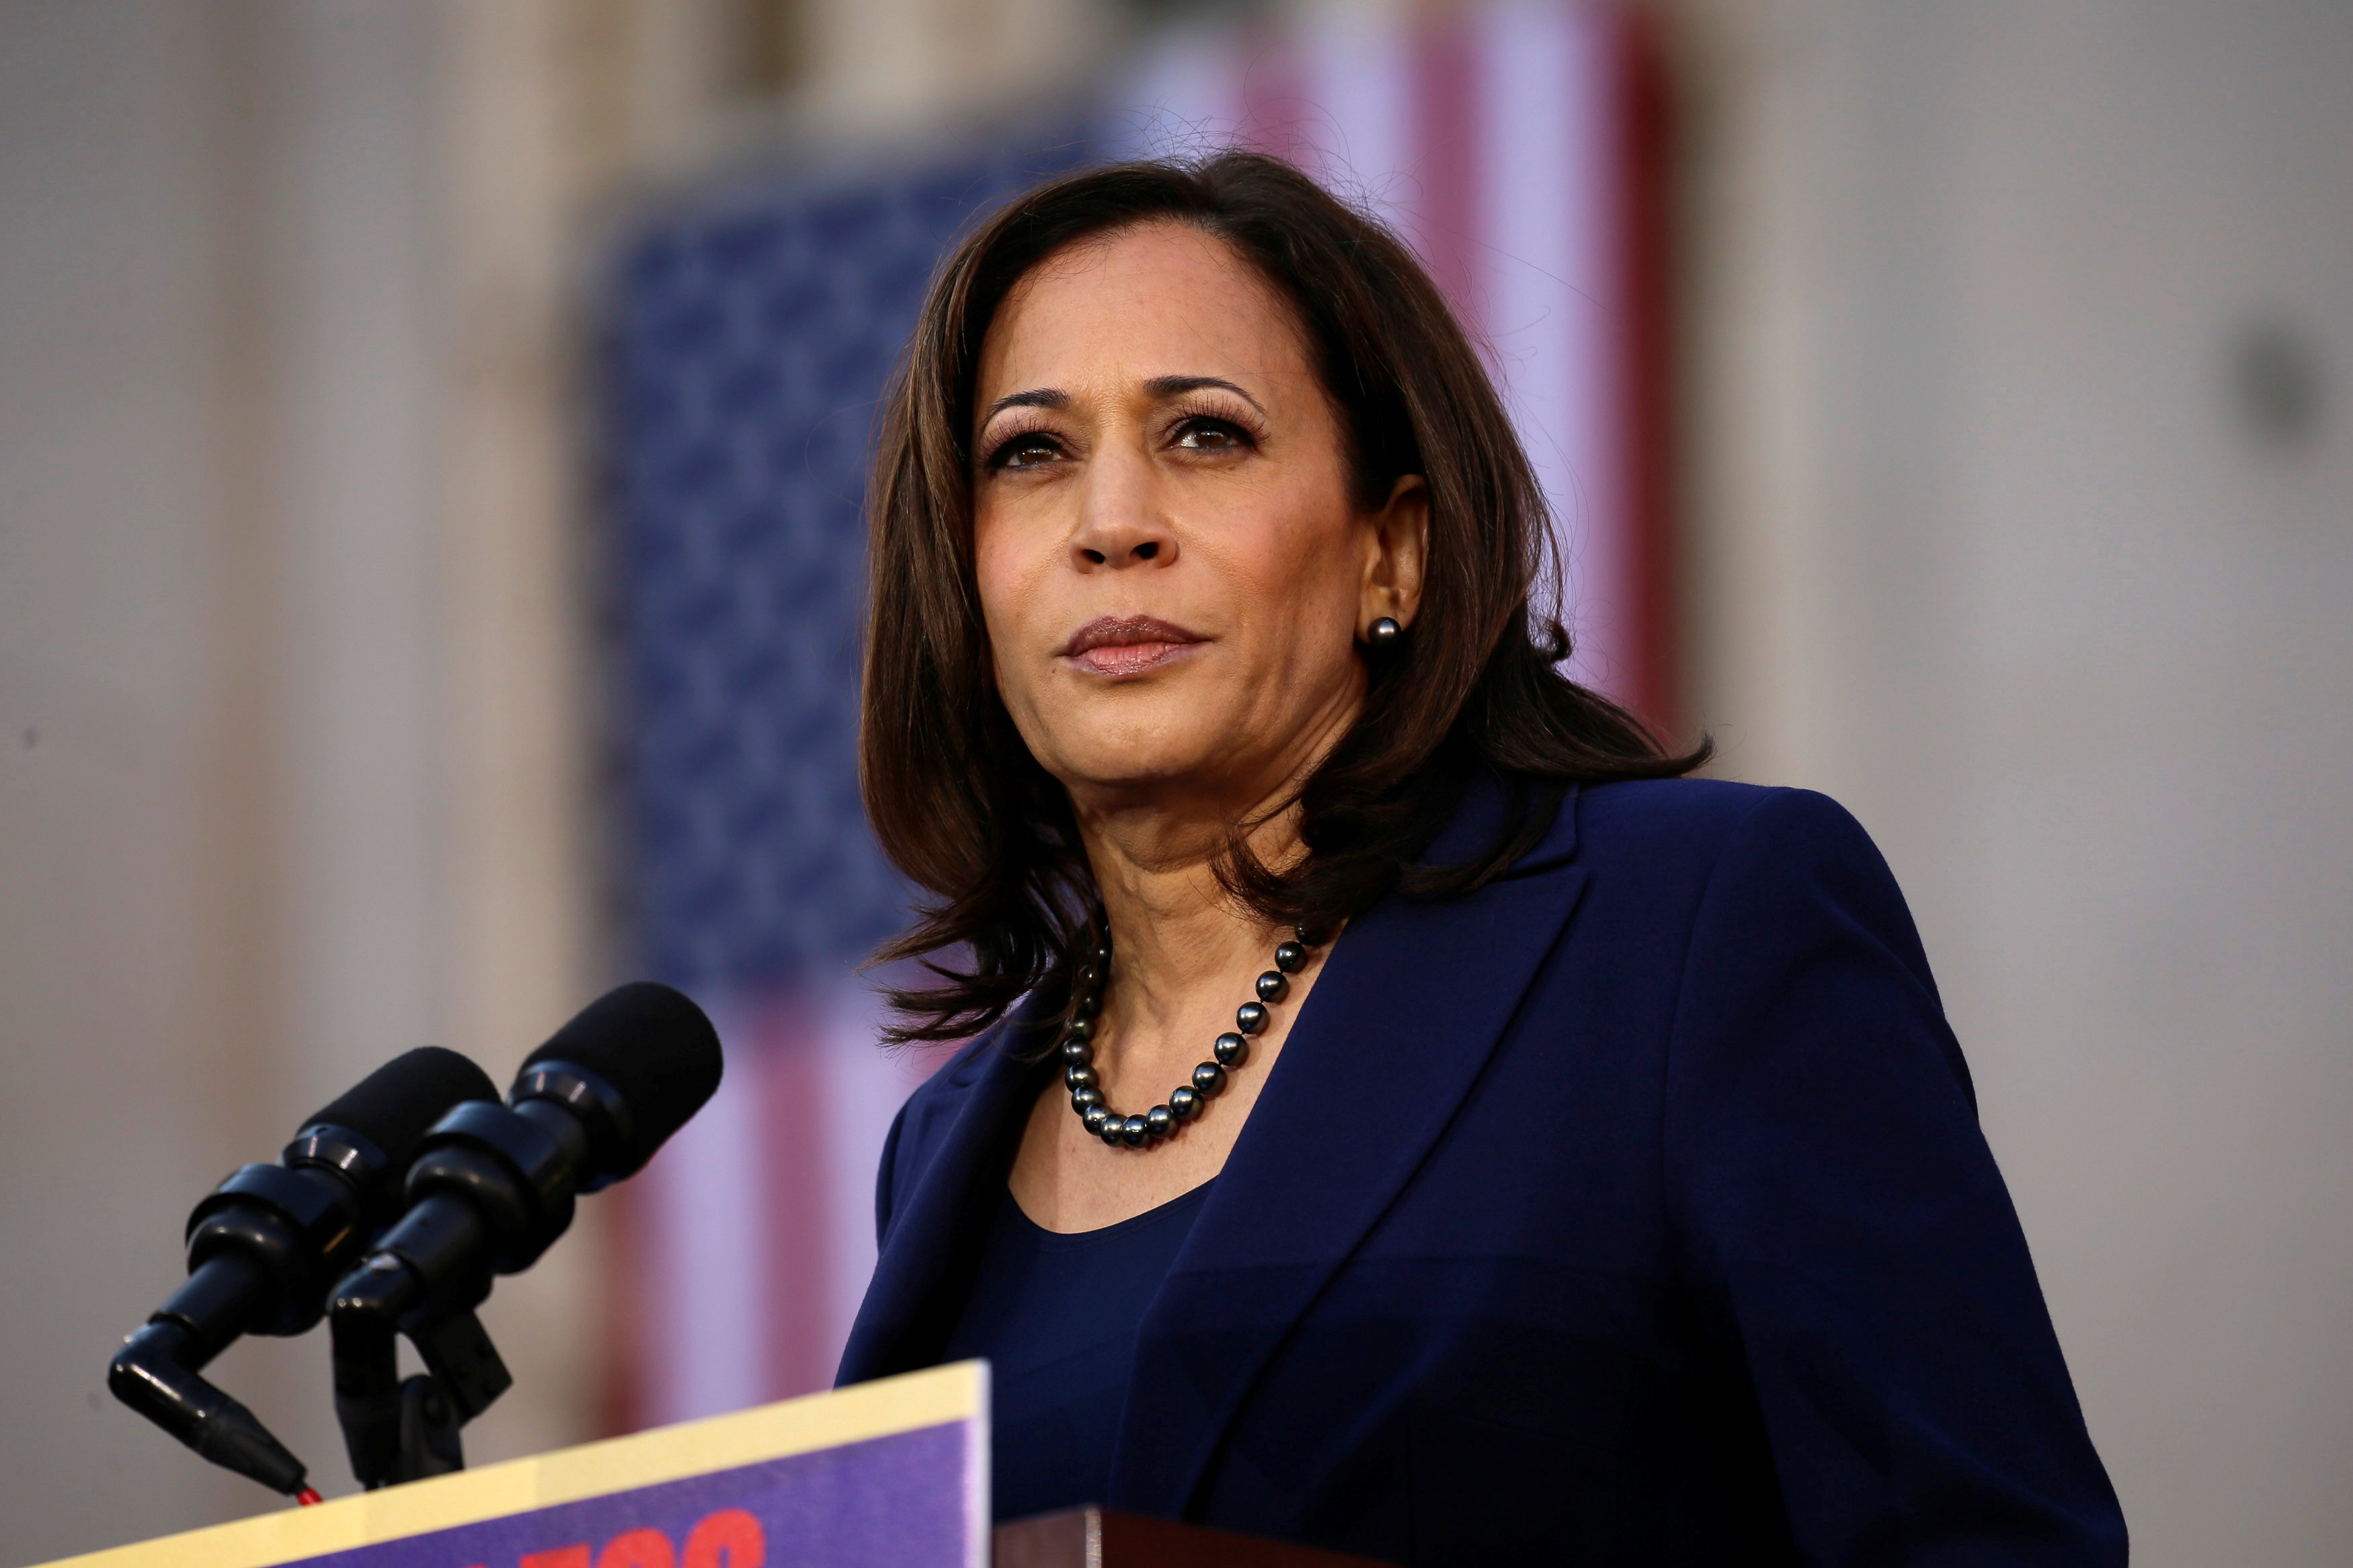 U.S. Senator Kamala Harris launches her campaign for President of the United States at a rally at Frank H. Ogawa Plaza in her hometown of Oakland, California, U.S., January 27, 2019. REUTERS/Elijah Nouvelage